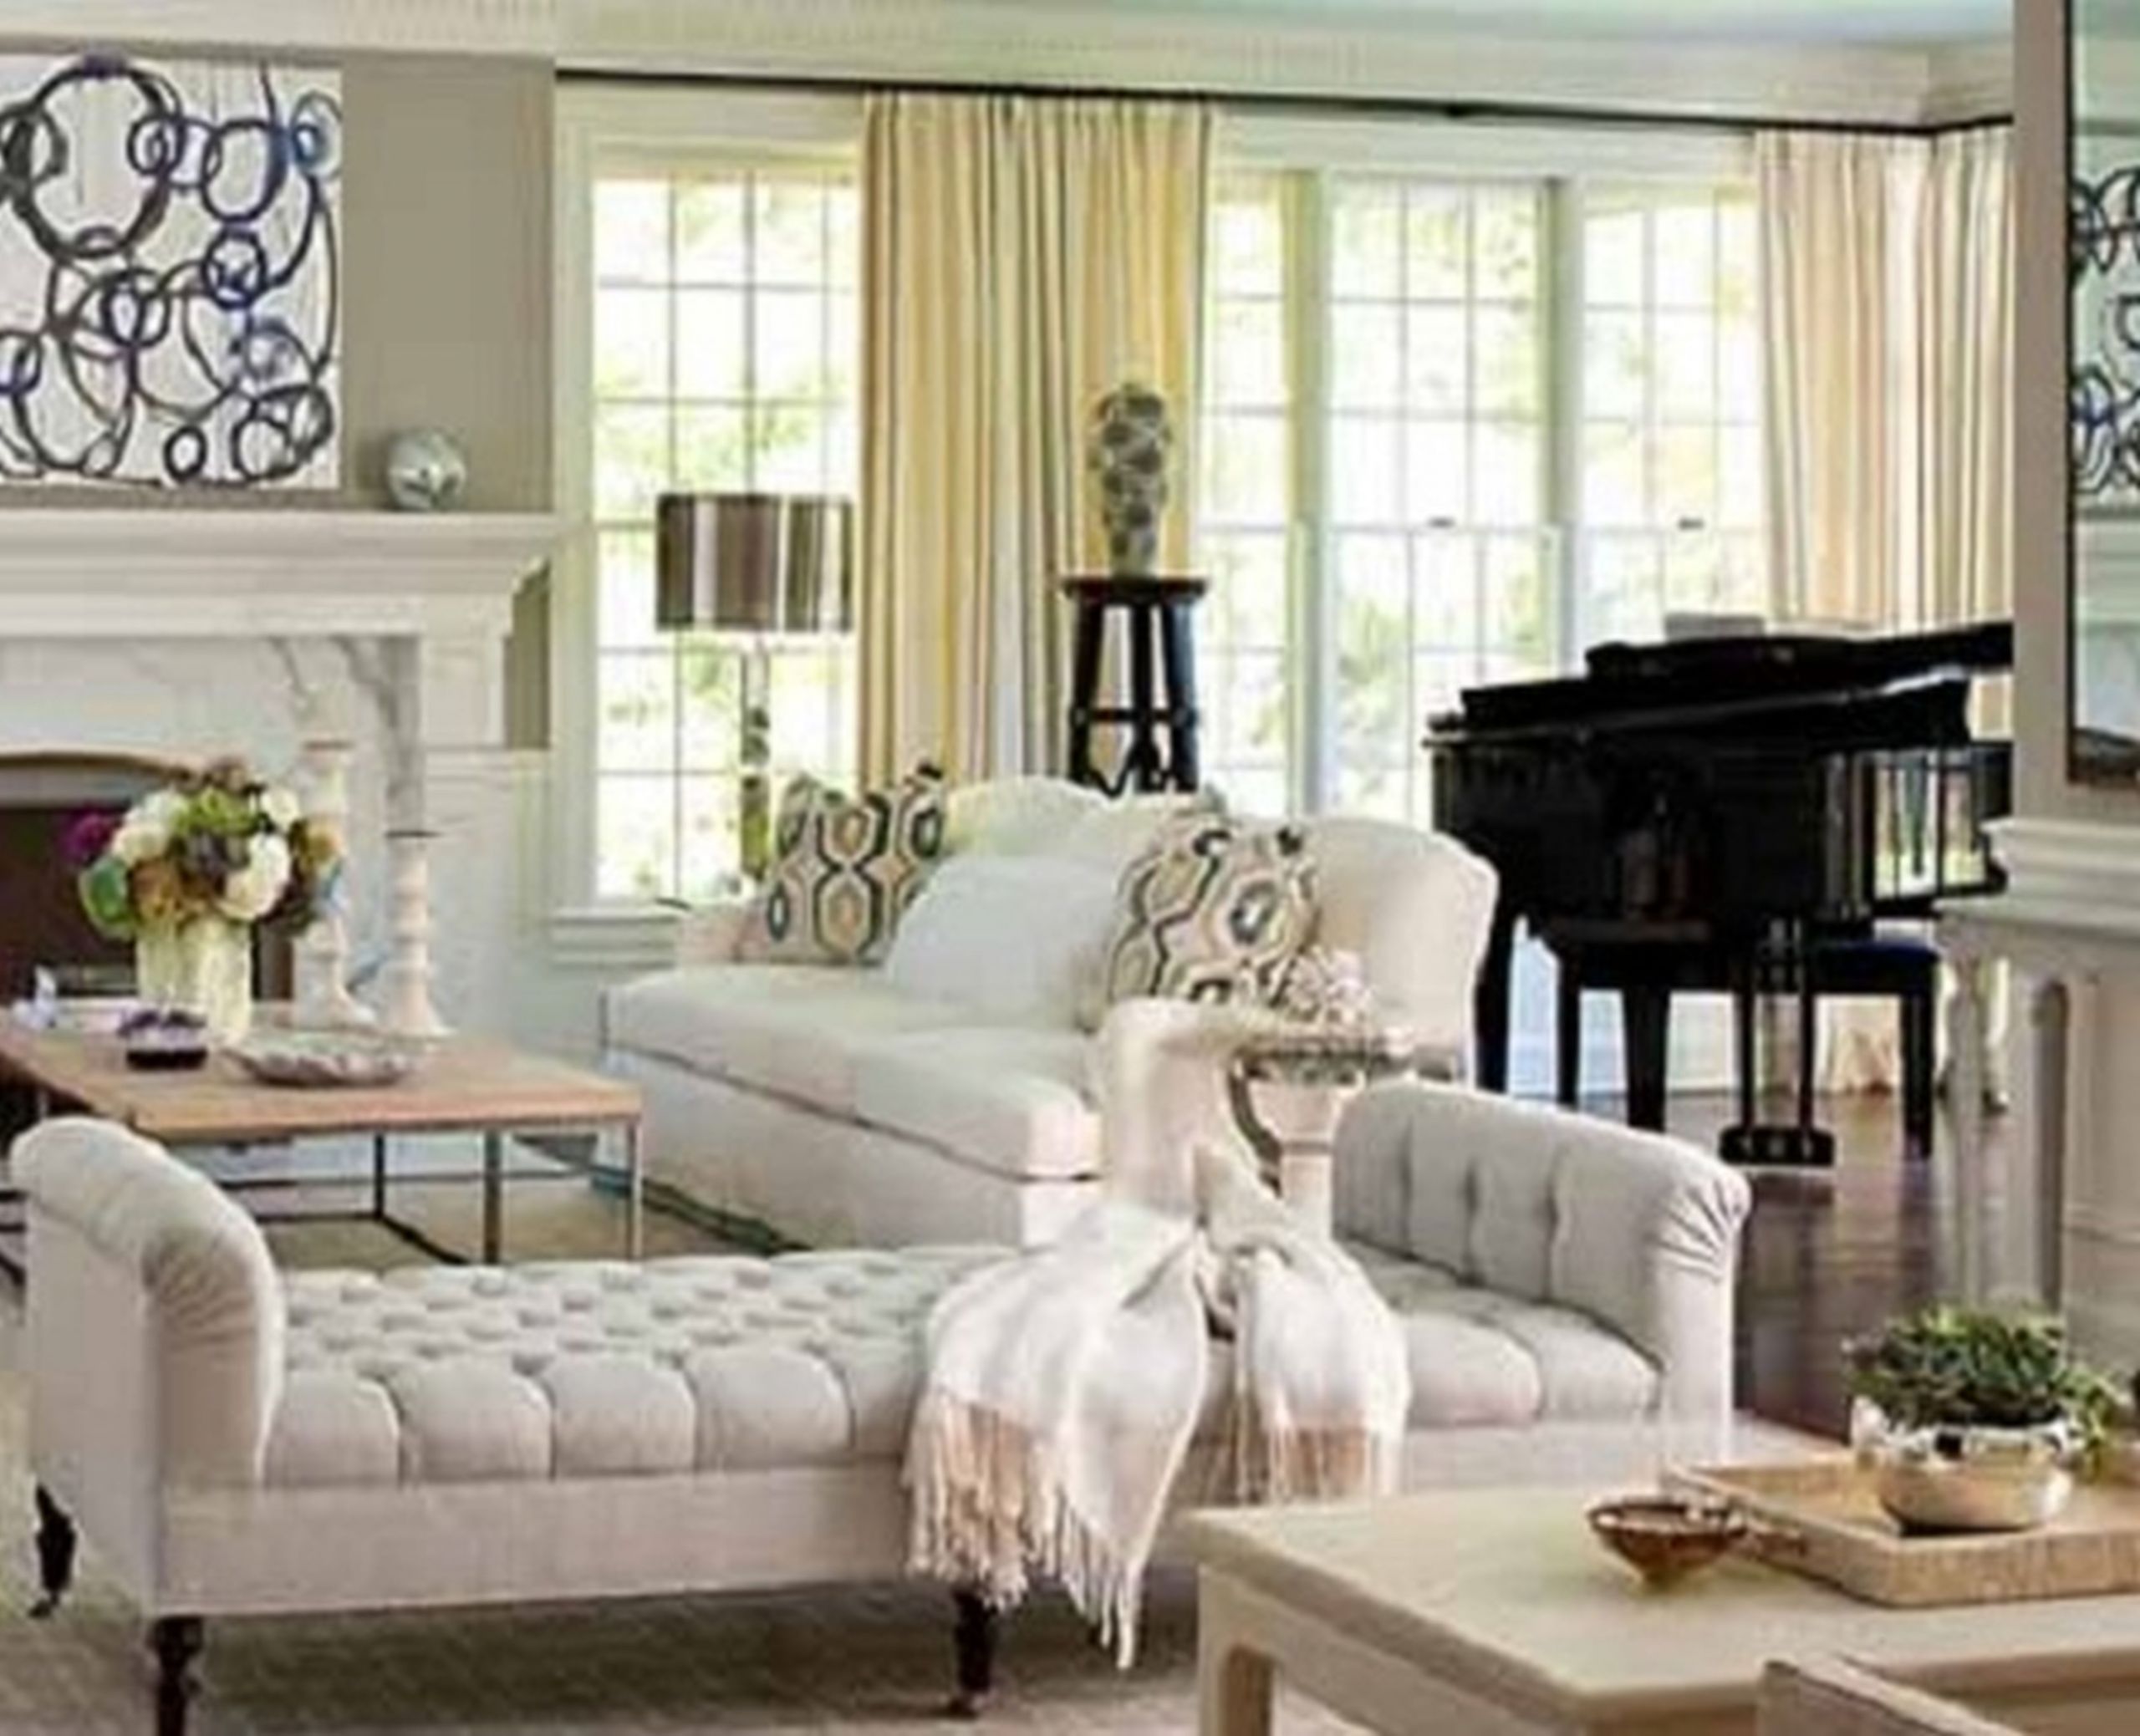 Transitional Decorating Ideas Living Room
 Transitional decorating ideas